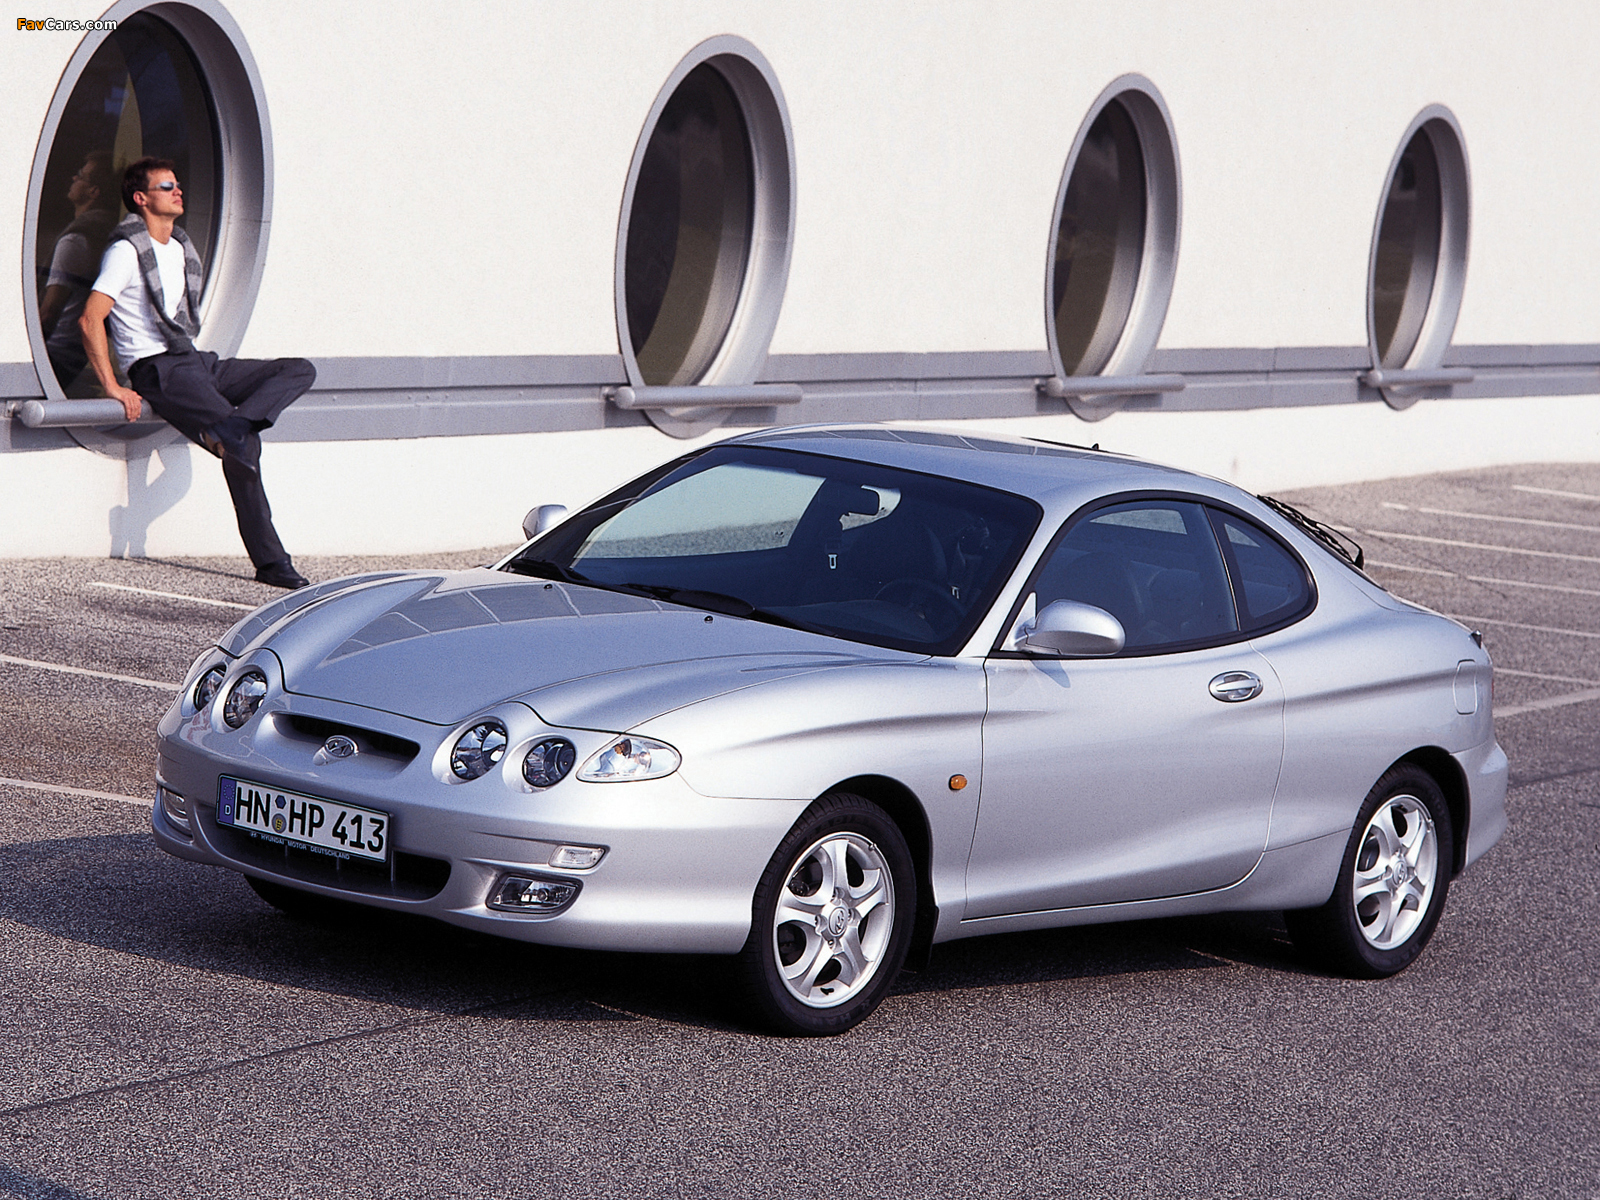 Hyundai Coupe (RD) 19992002 pictures (1600x1200)